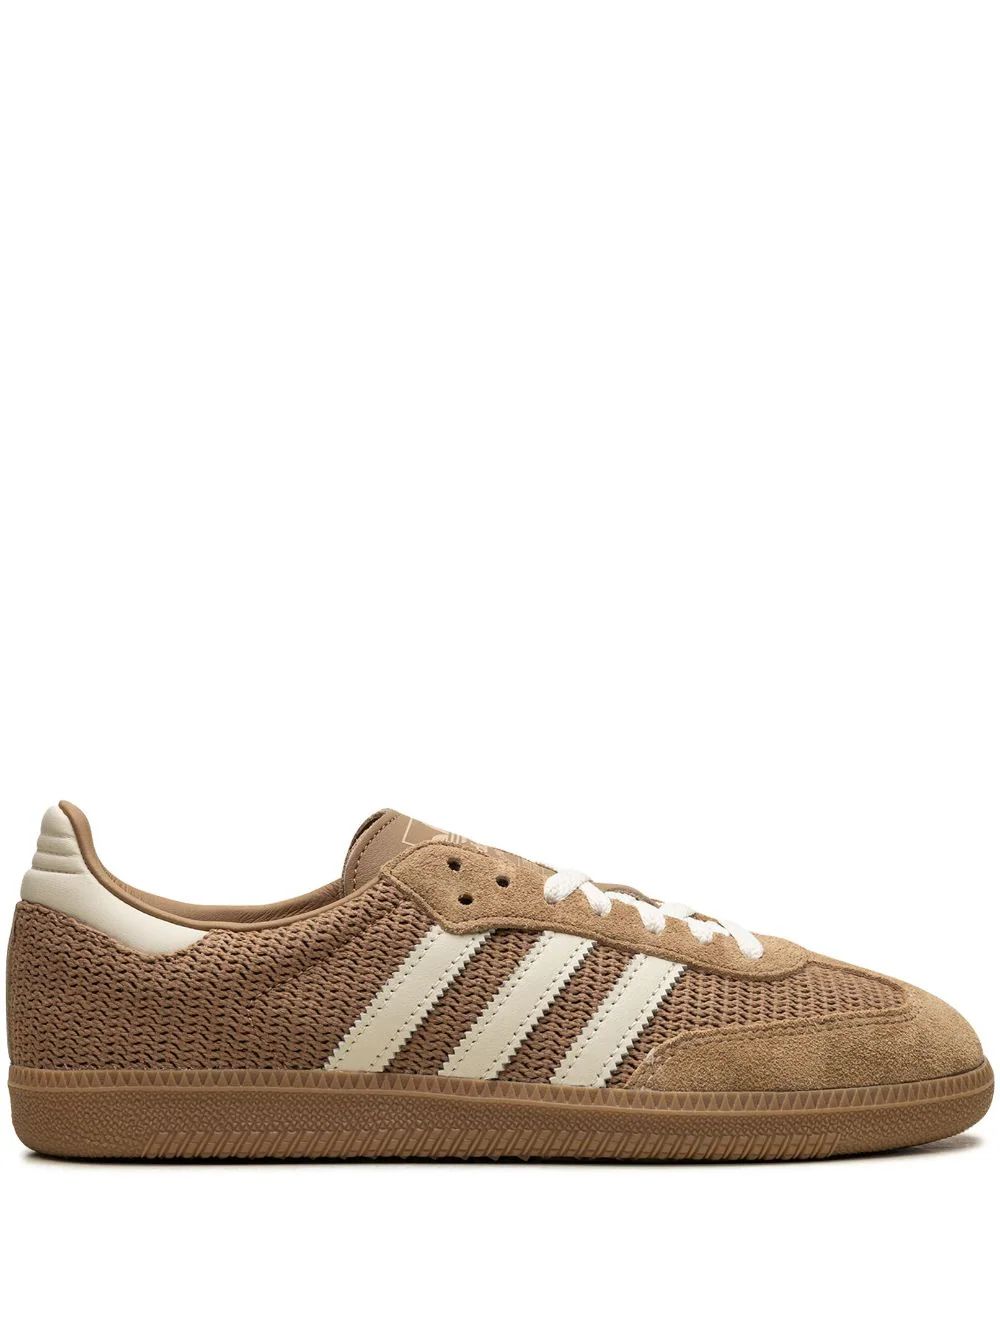 The DetailsadidasSamba OG lace-up sneakersImportedHighlightssand brown leather mesh panelling  si... | Farfetch Global